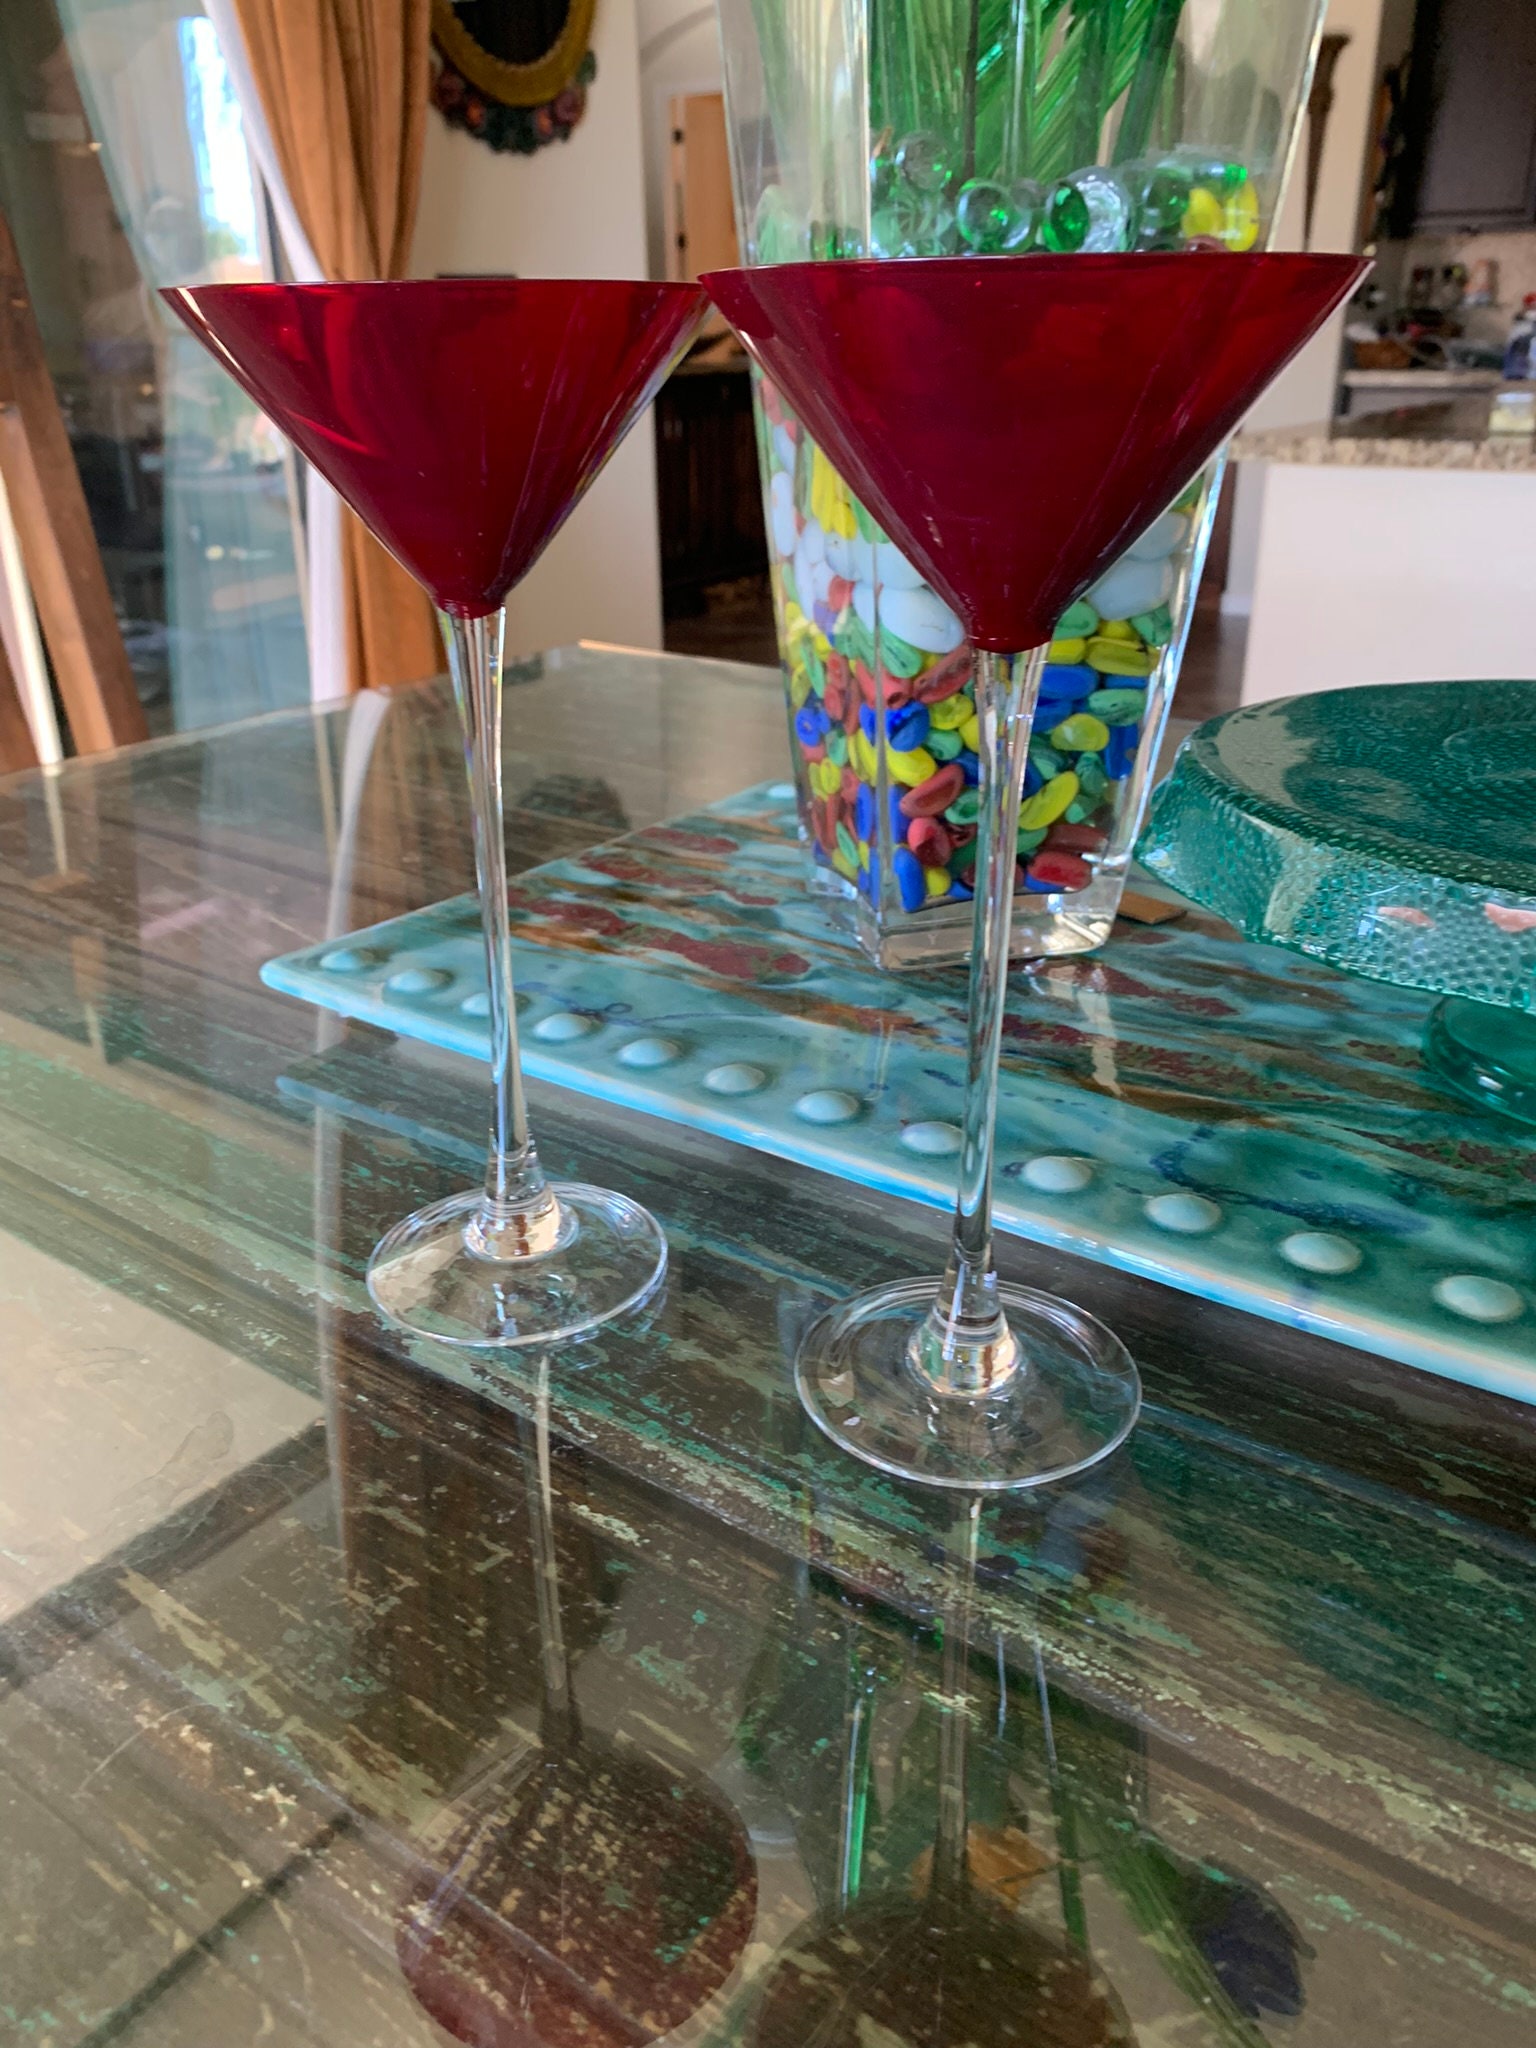 A Lot Of Martini Glasses Stand On The Bar Red Syrup Blue Rim On The Glasses  Stock Photo - Download Image Now - iStock